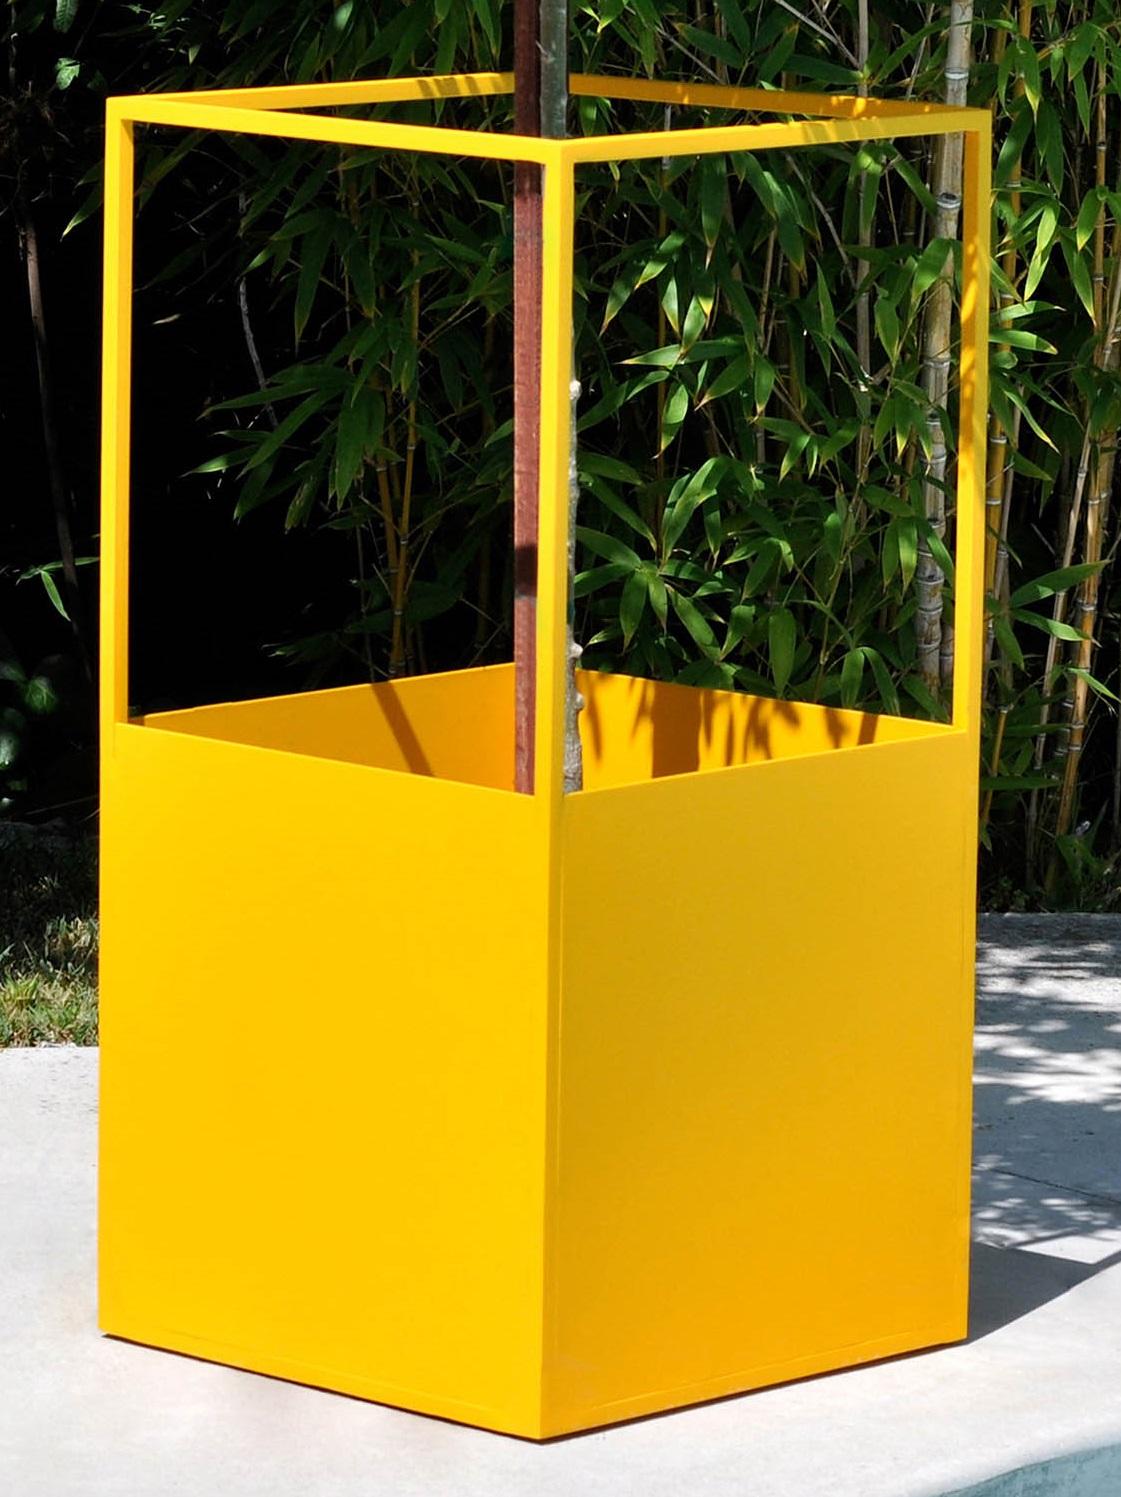 Skyline Medium Planter by Phase Design
Dimensions: D 40.6 x W 40.6 x H 81.3 cm. 
Materials: Powder-coated aluminum.

Solid aluminum available in flat black, white, gray, or yellow powder coat finish. Also available for outdoor use. Prices may vary.